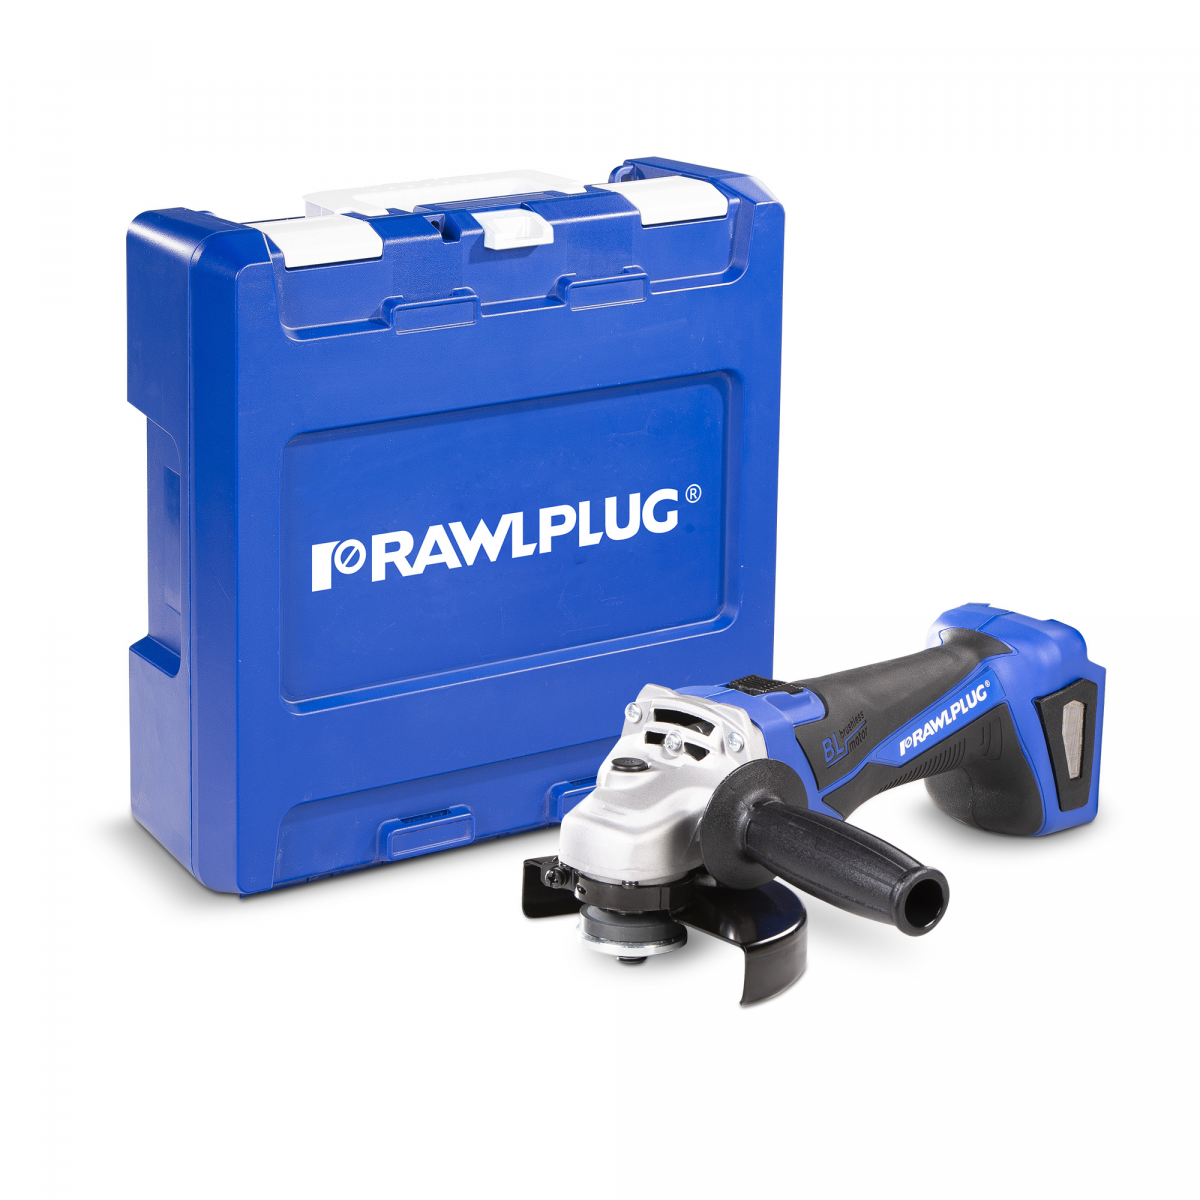 R-PAG18-PV-S Cordless RawlGrinder 18V 125mm bare tool, in a transport case